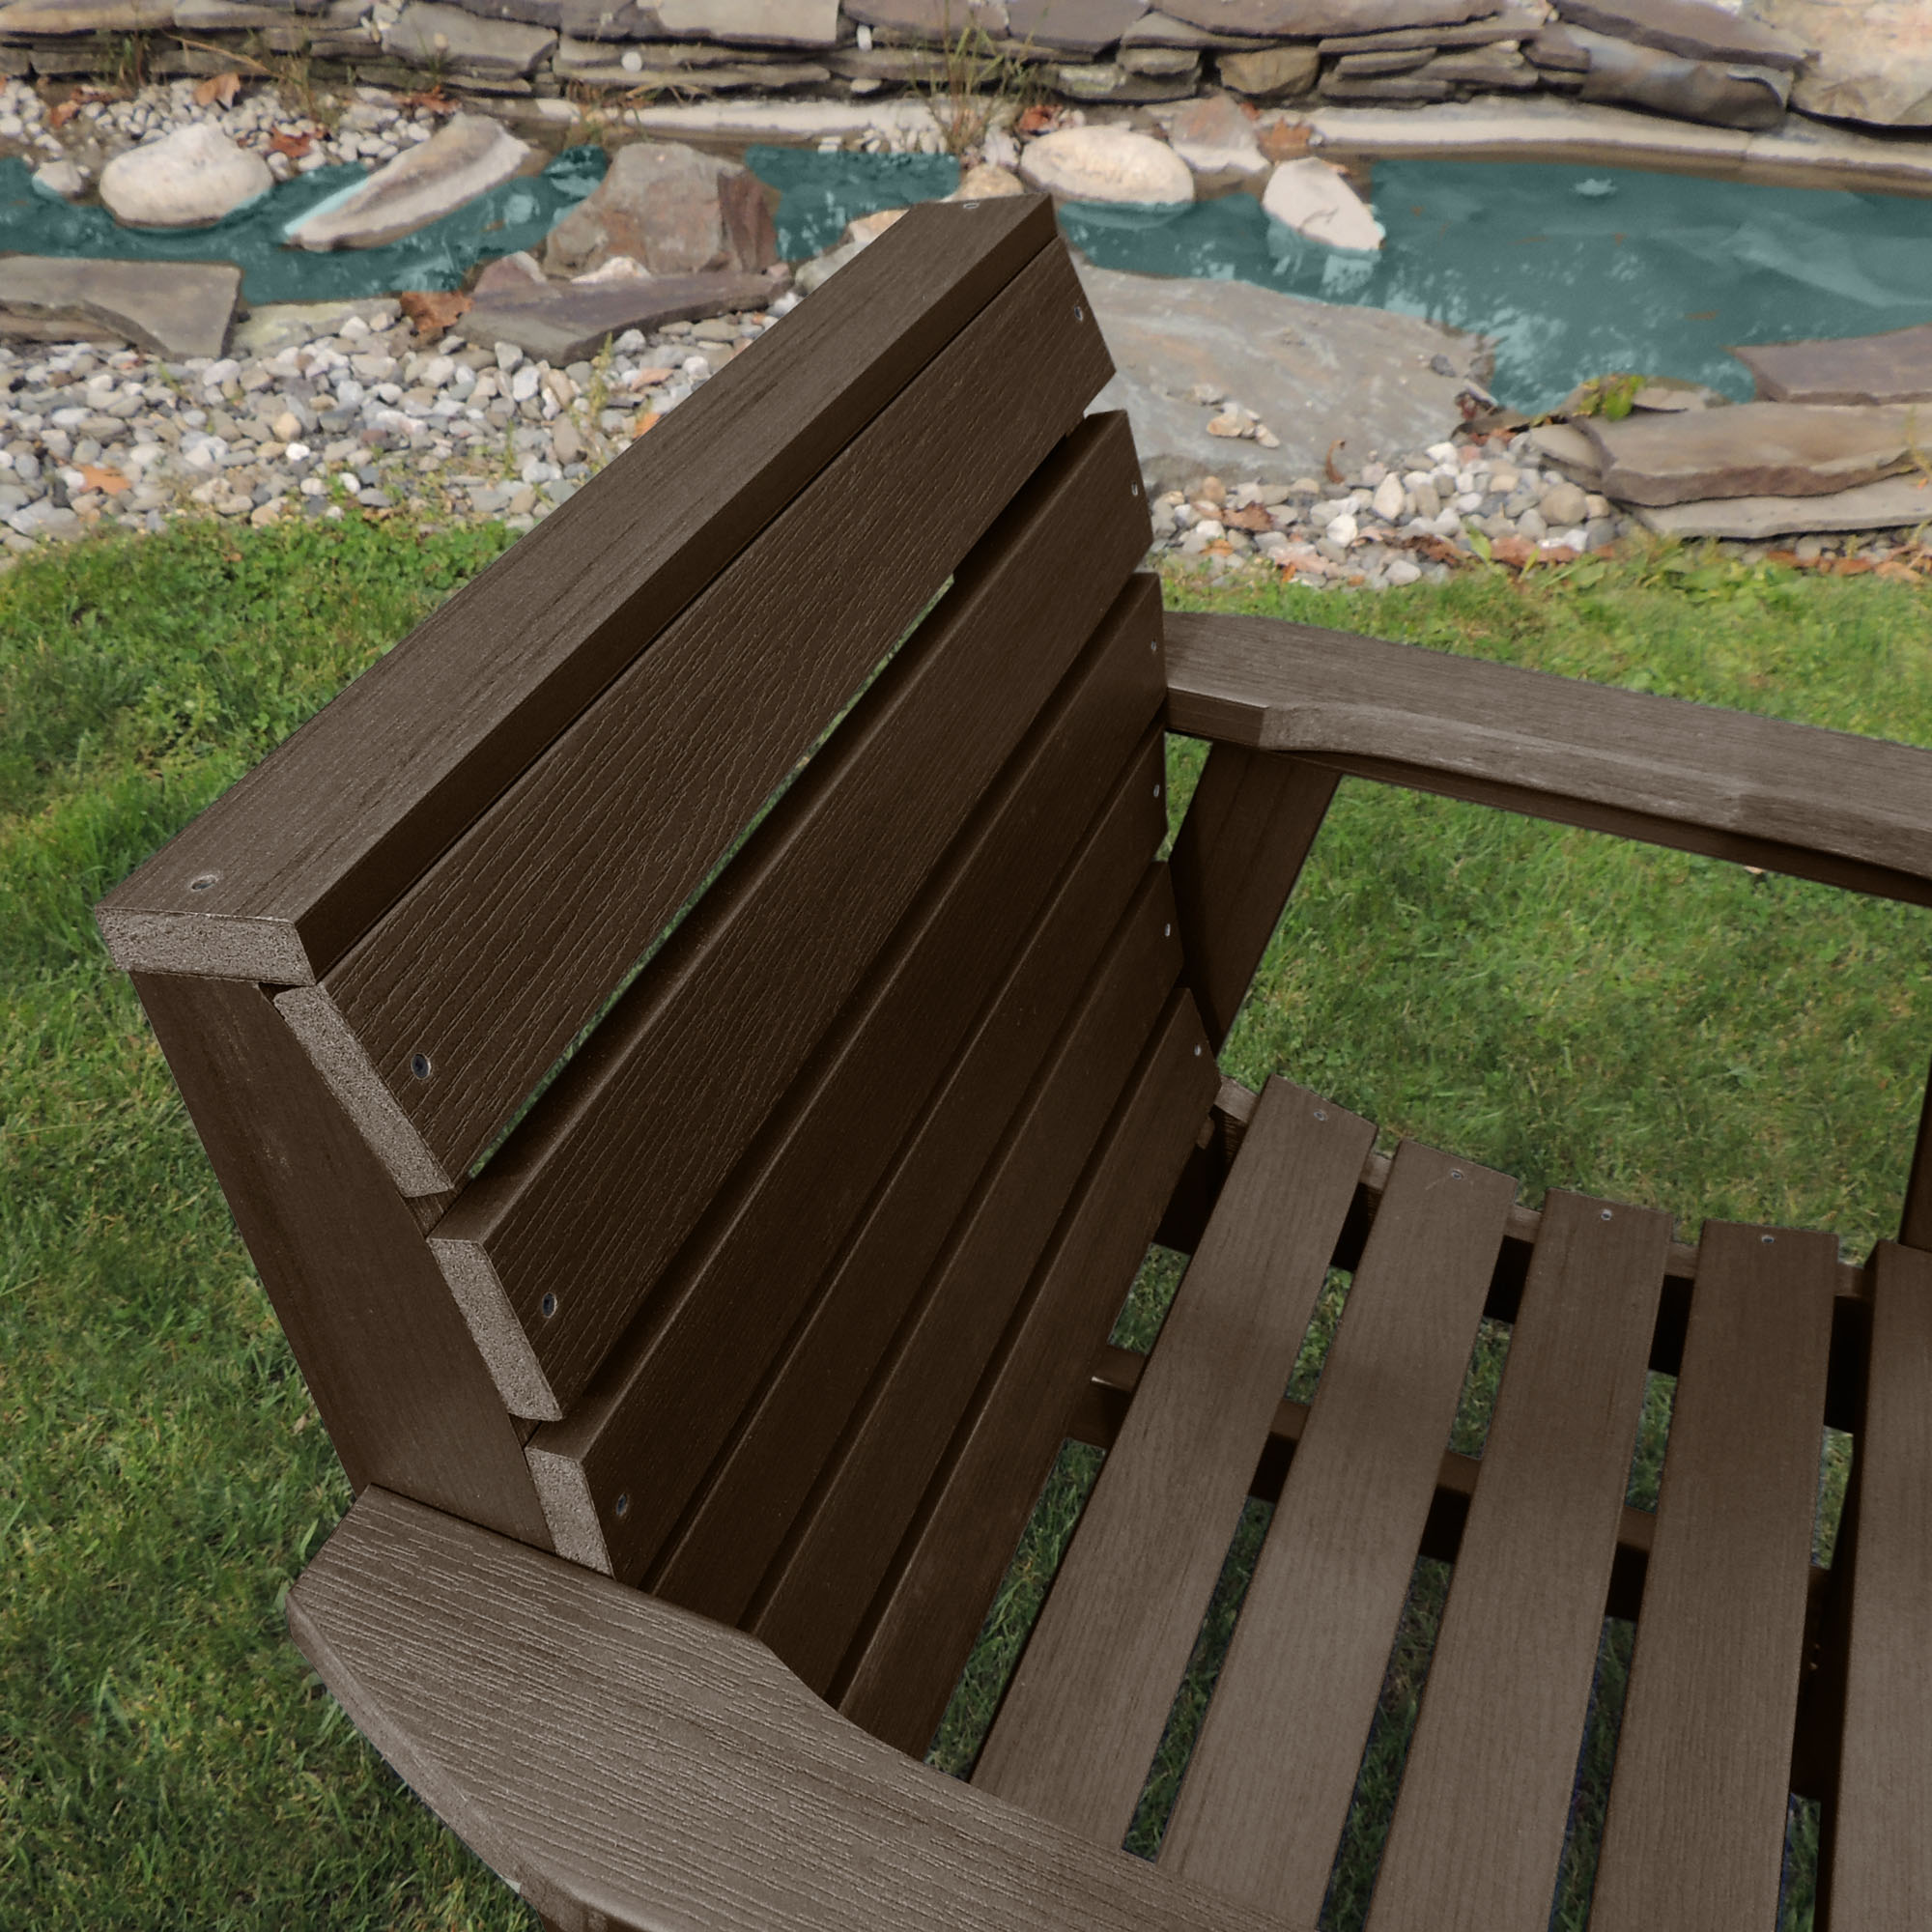 Highwood Weatherly Garden Chair - image 3 of 5